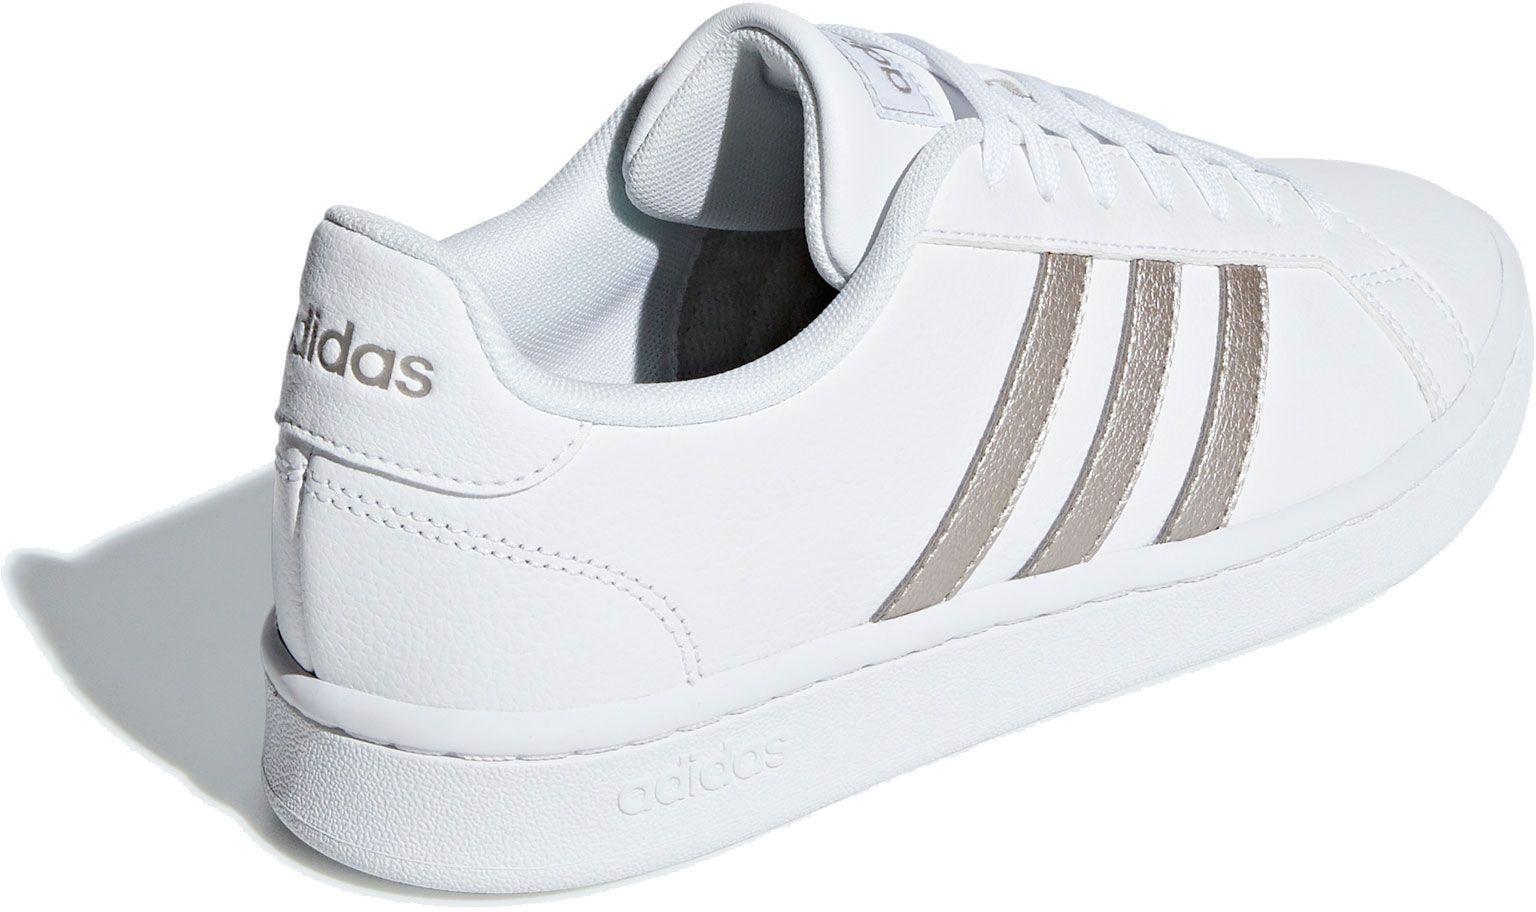 adidas Lace Grand Court Shoes in White/Silver (White) - Lyst